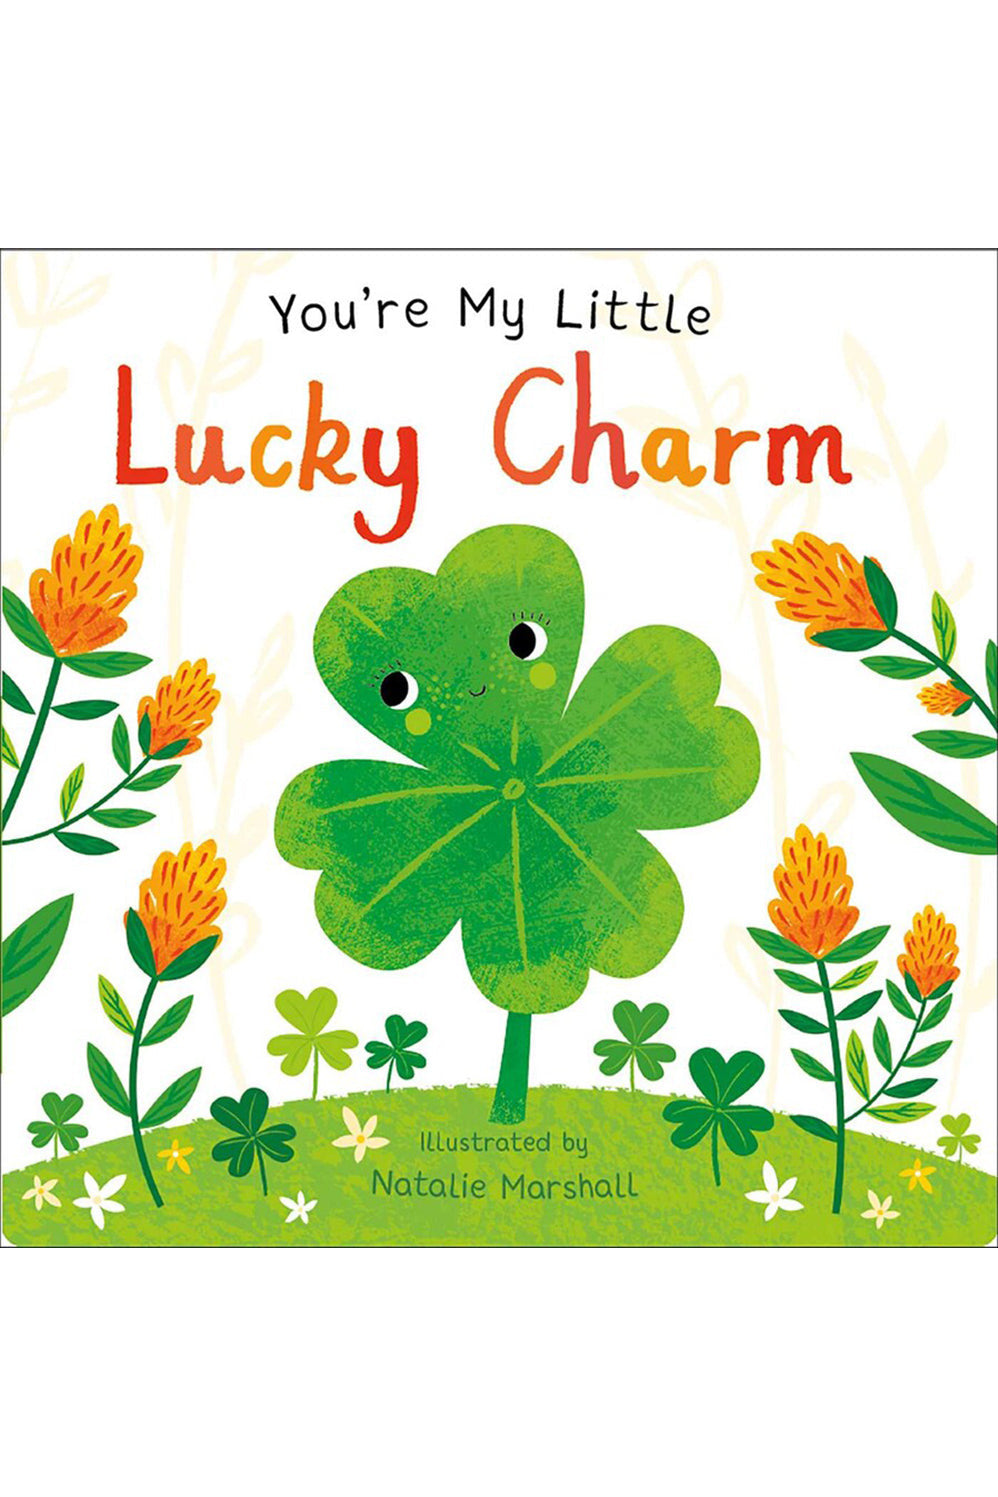 YOU'RE MY LITTLE LUCKY CHARM